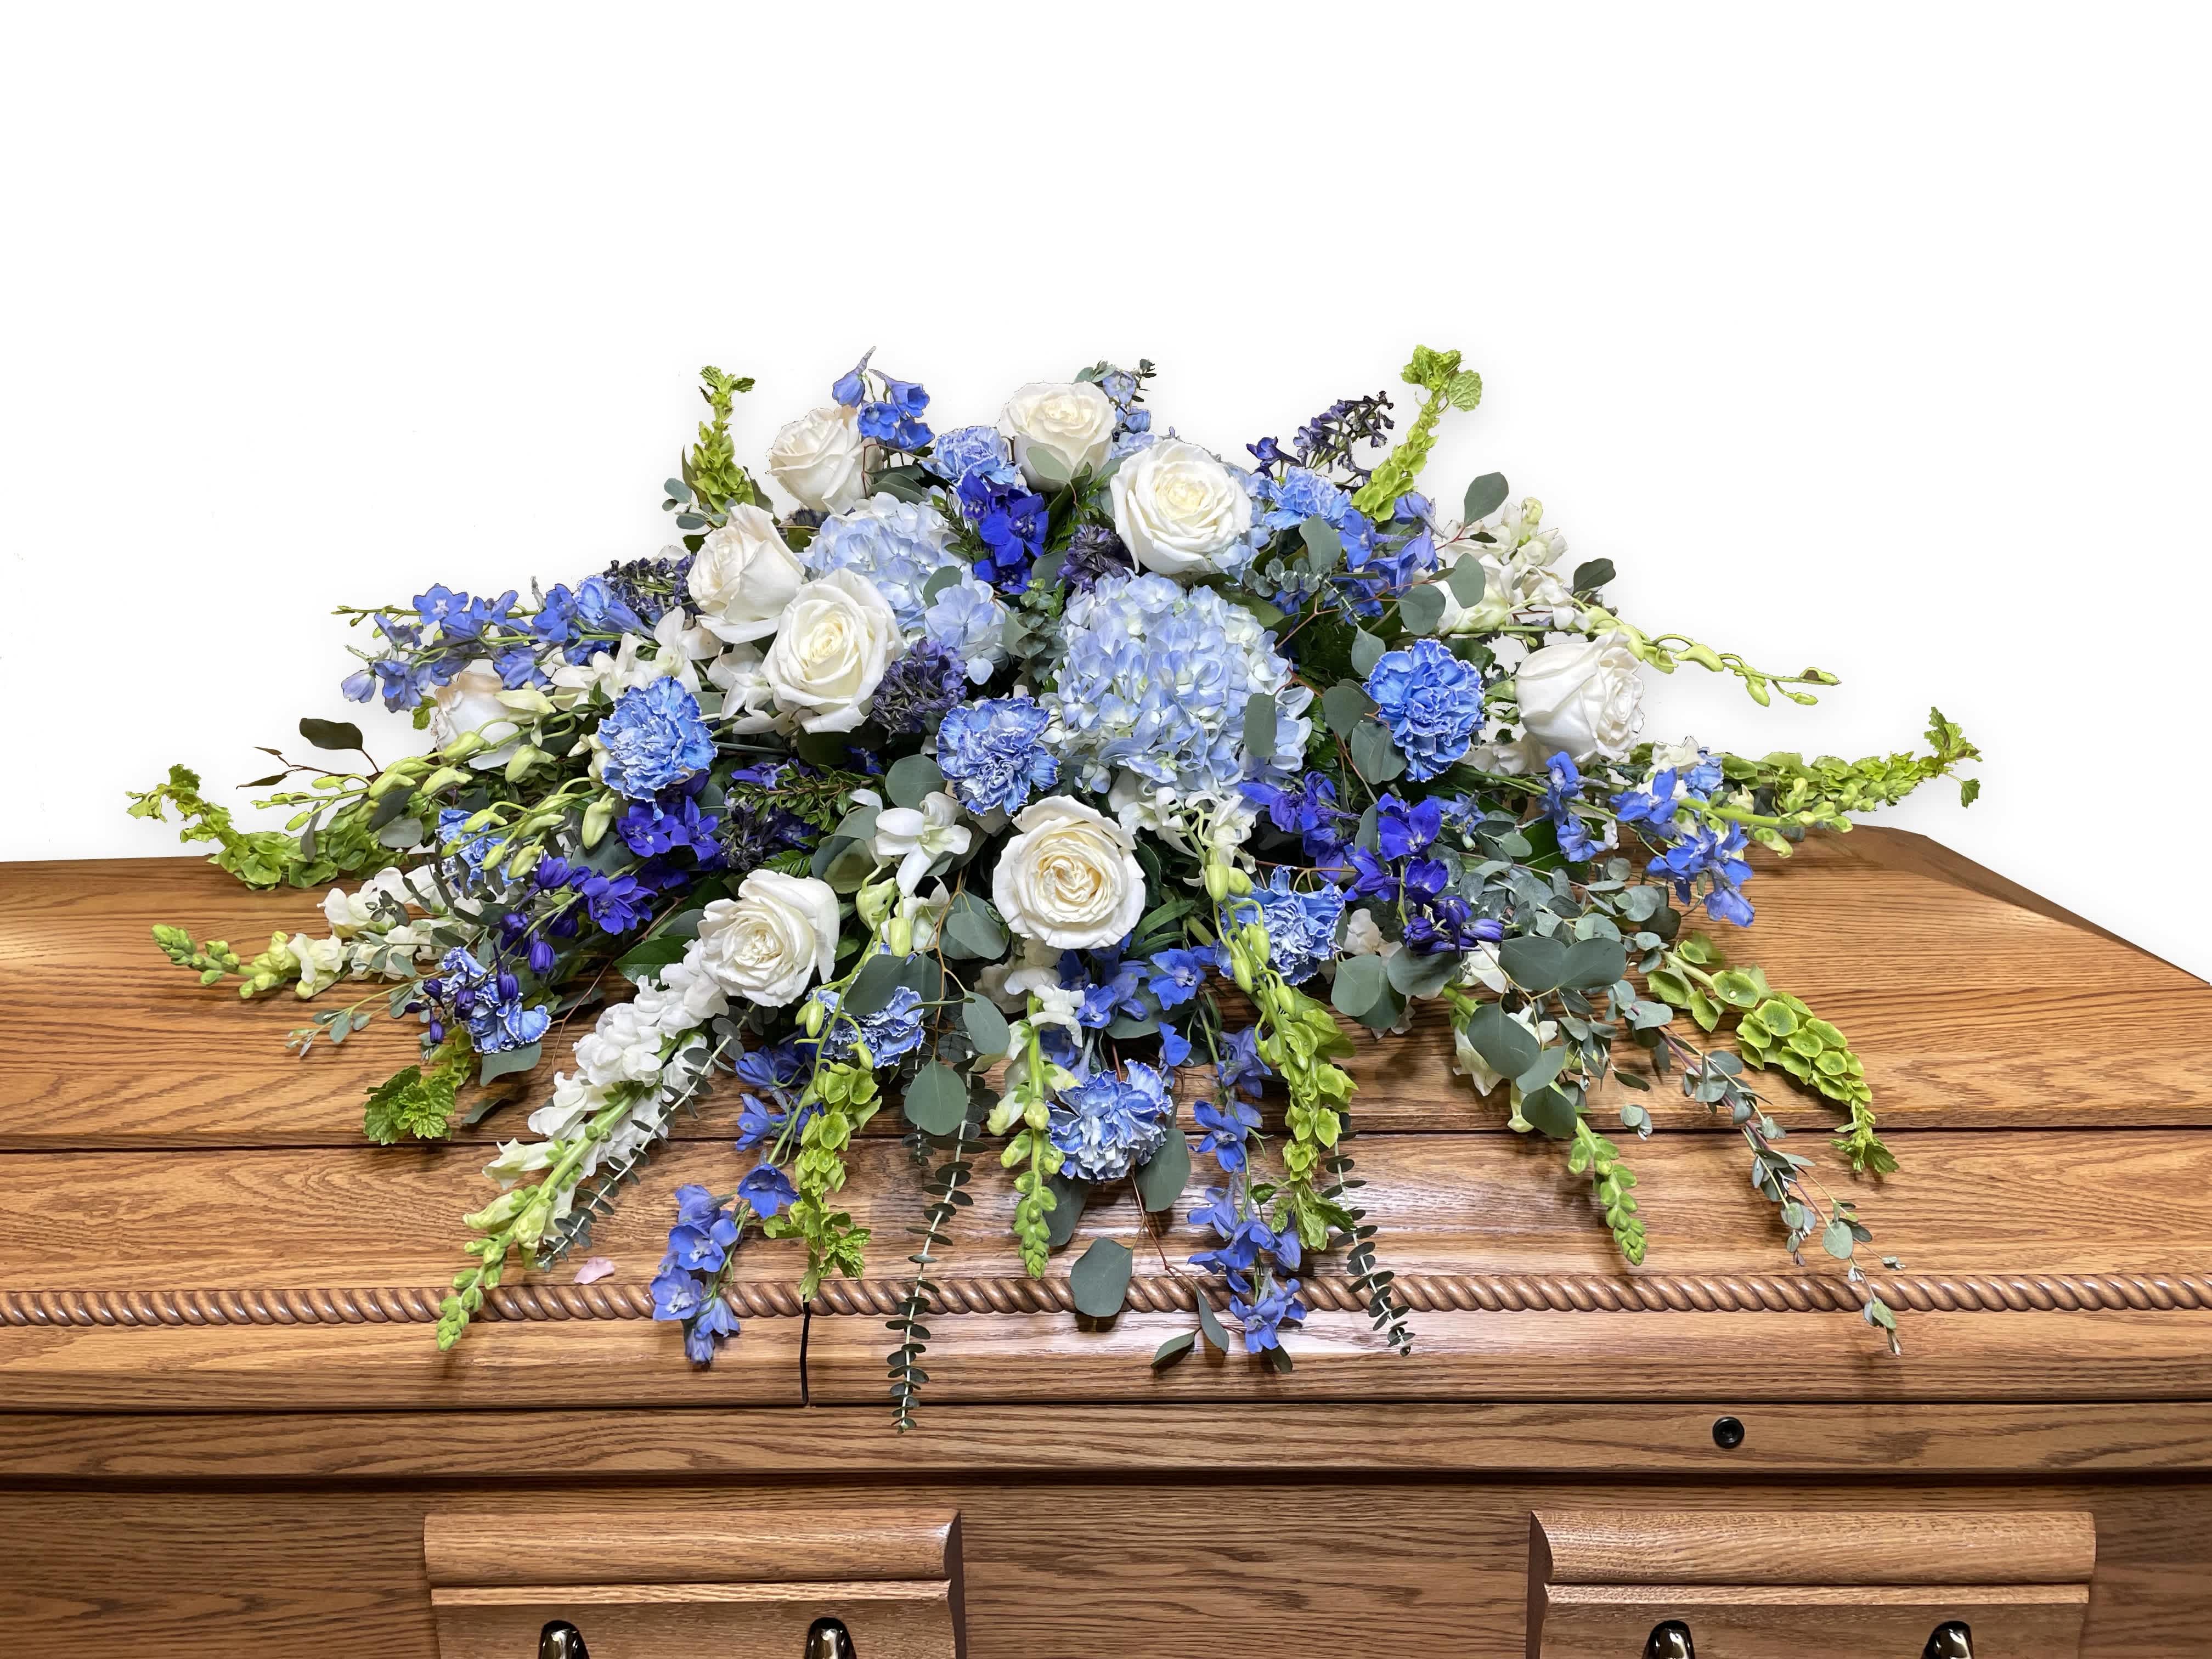 Peaceful Half Casket Cover - Honor a life so beautifully lived with a proud display of blue and white blooms. Our half casket cover, crafted with care and artistry by our expert florists with blue delphinium, white roses, and accented with blue hydrangeas , is an unforgettable way to commemorate a lifetime of loving devotion.